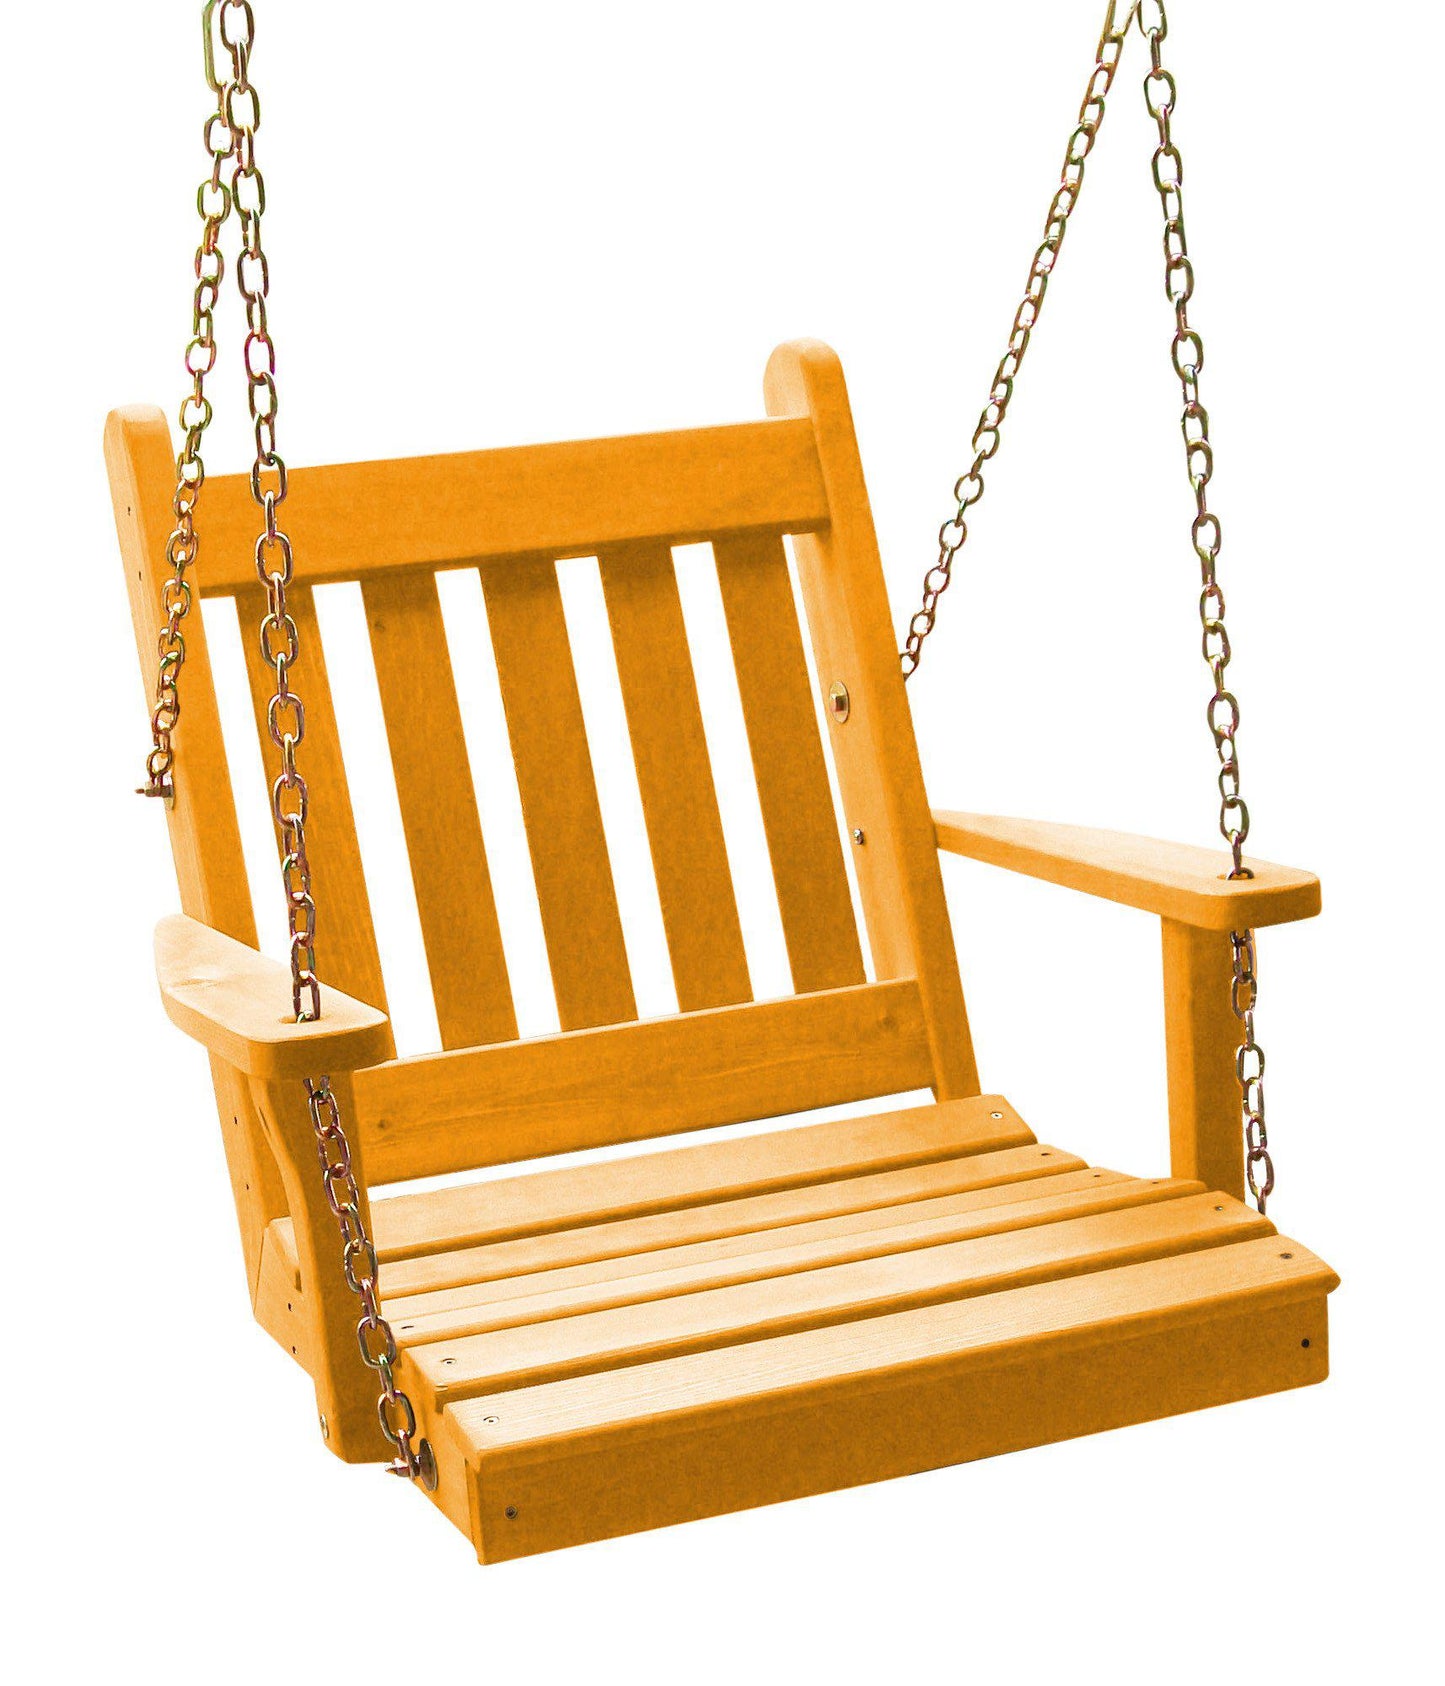 A&L FURNITURE CO. Western Red Cedar 2' Traditional English Single Chair Swing - LEAD TIME TO SHIP 4 WEEKS OR LESS